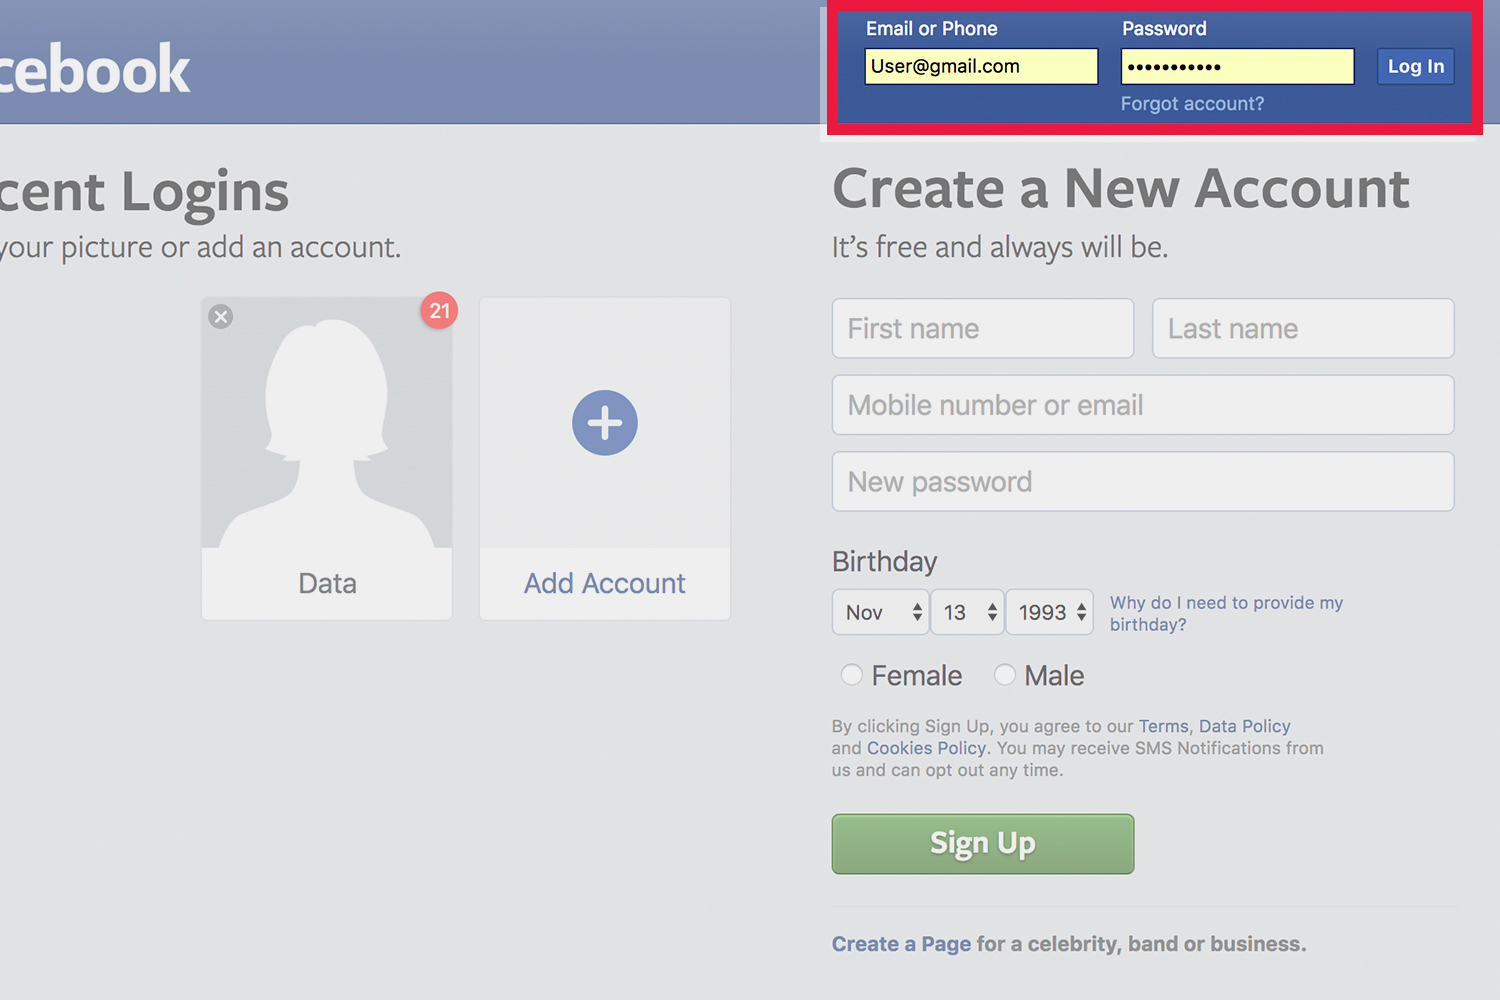 how to deactivate facebook account for longer than 7 days